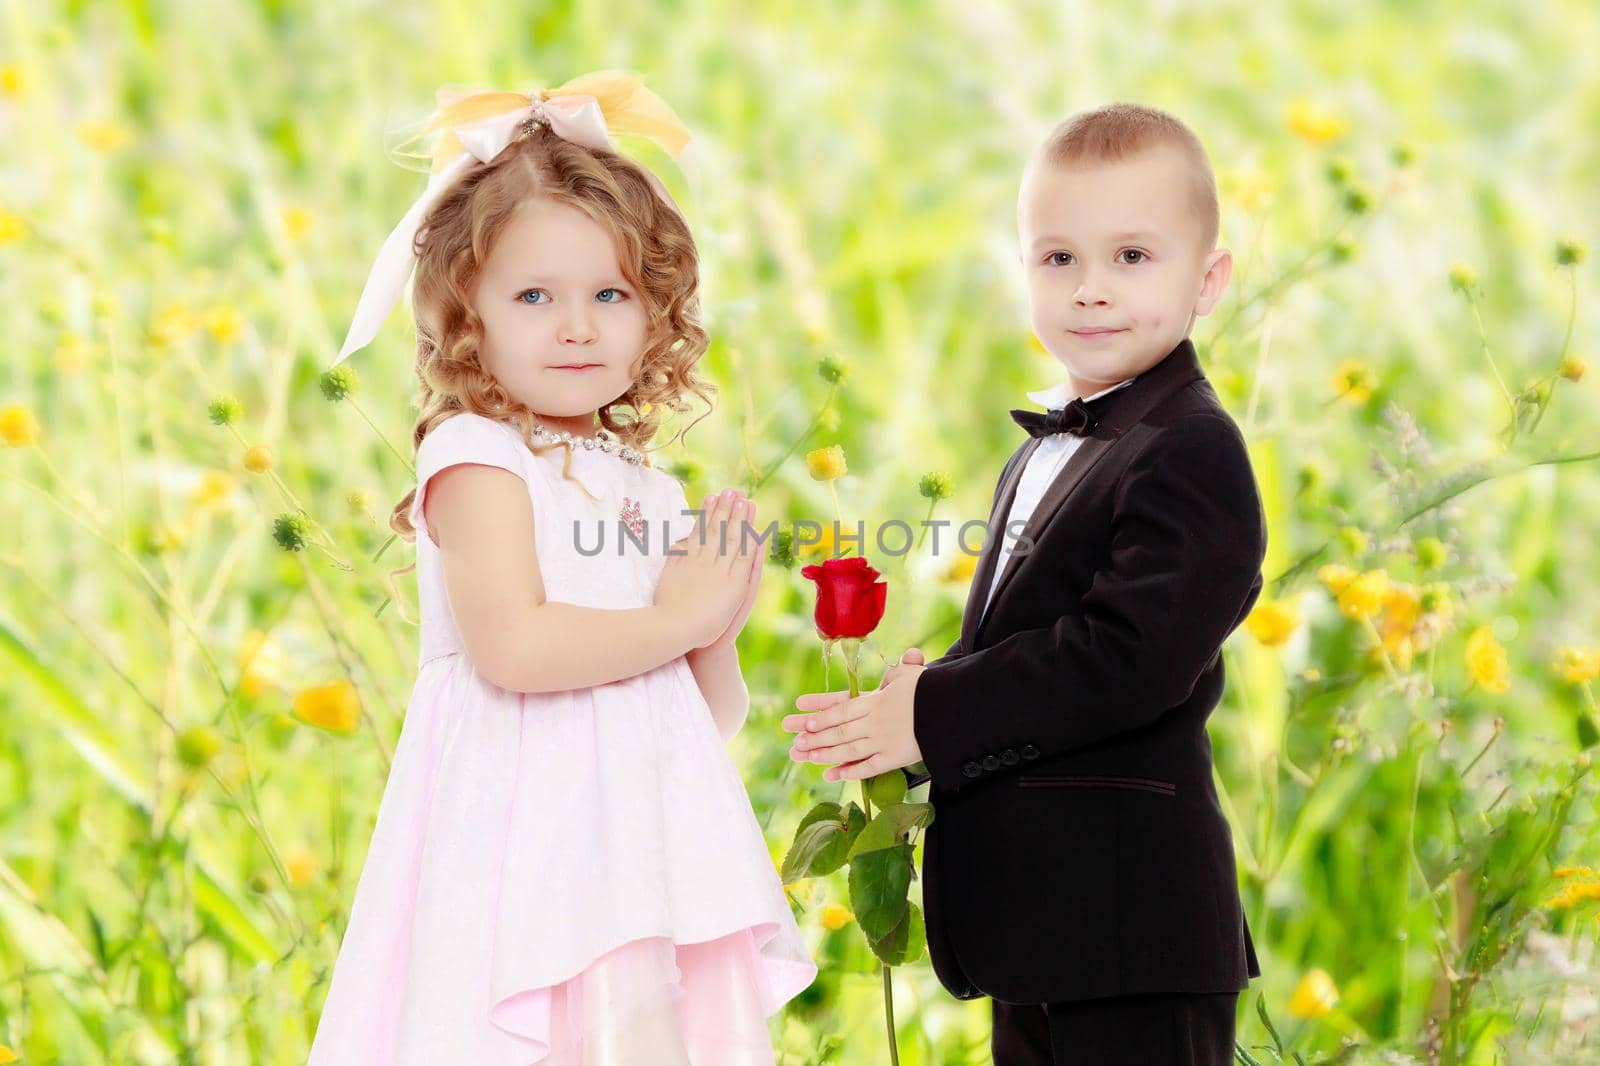 Little boy in black suit with bow tie gives a big red rose charming little girl.Summer white green blurred background.